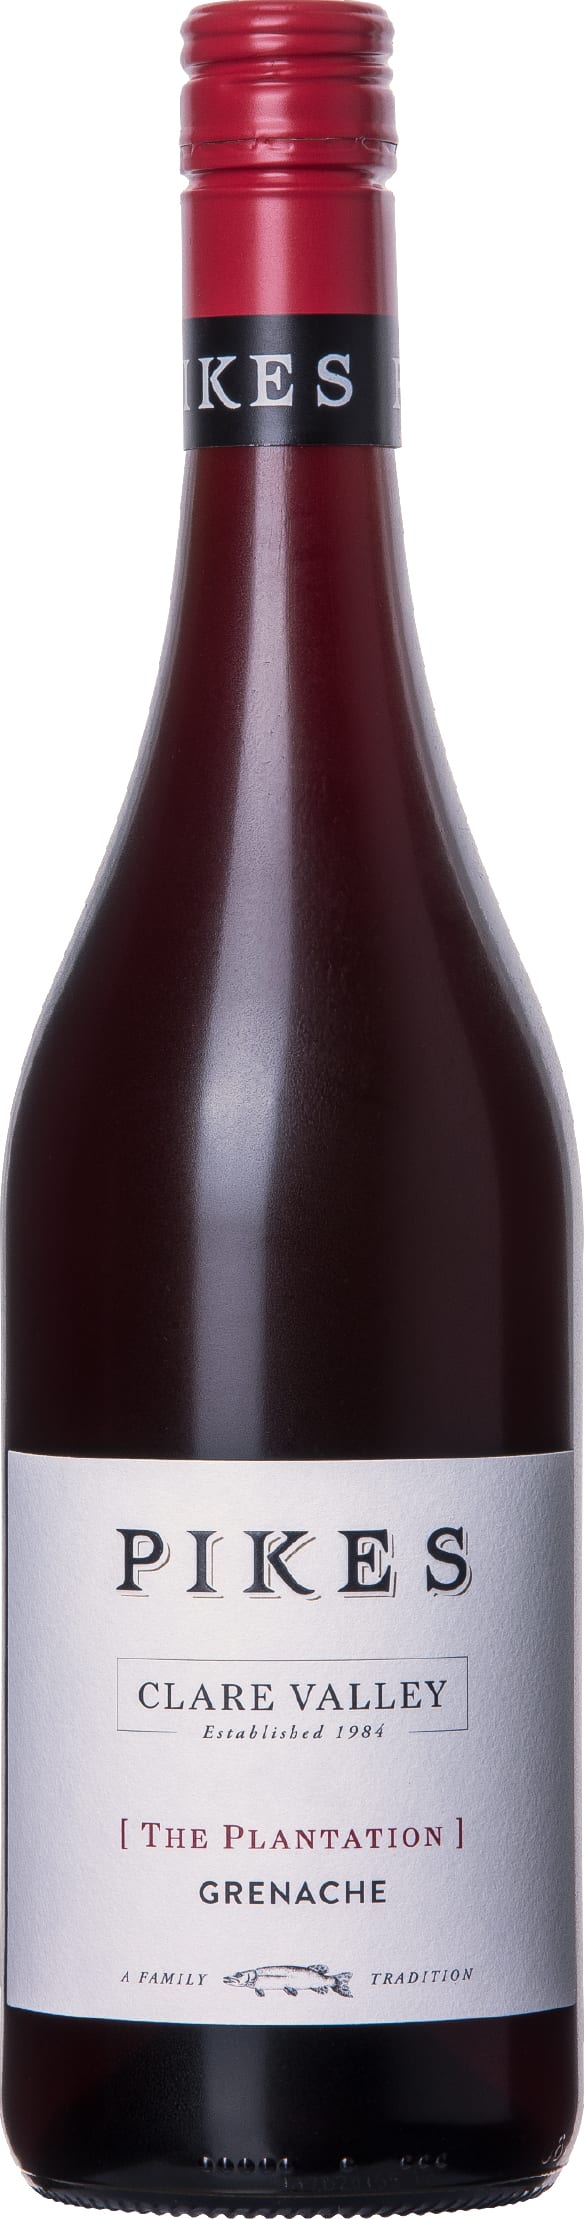 Pikes The Plantation Grenache 2019 6x75cl - Just Wines 